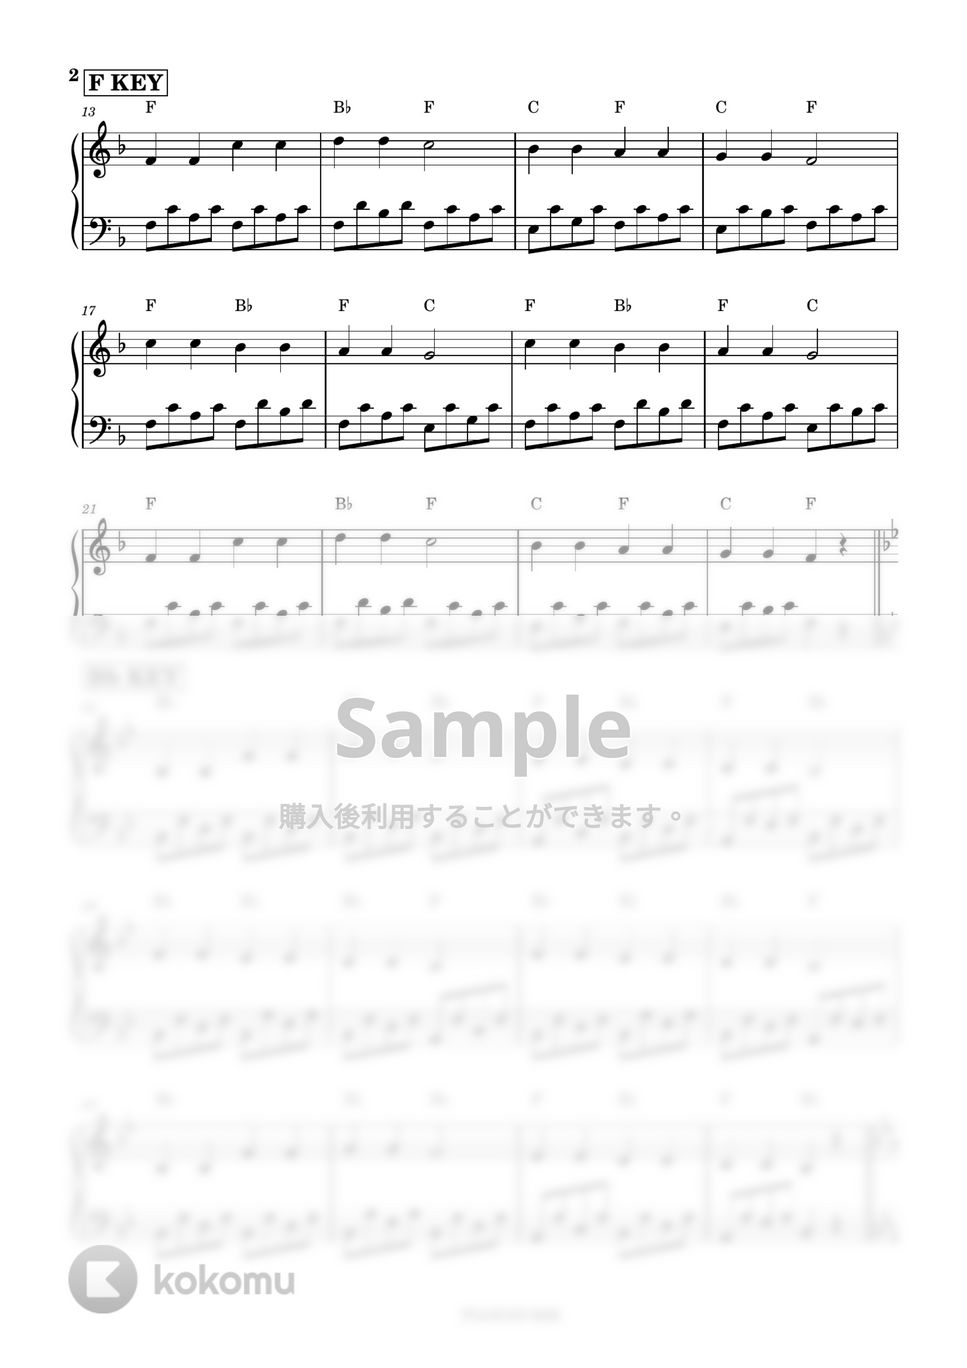 Twinkle Twinkle Little star (12Key Exercise) by PIANOSUMM